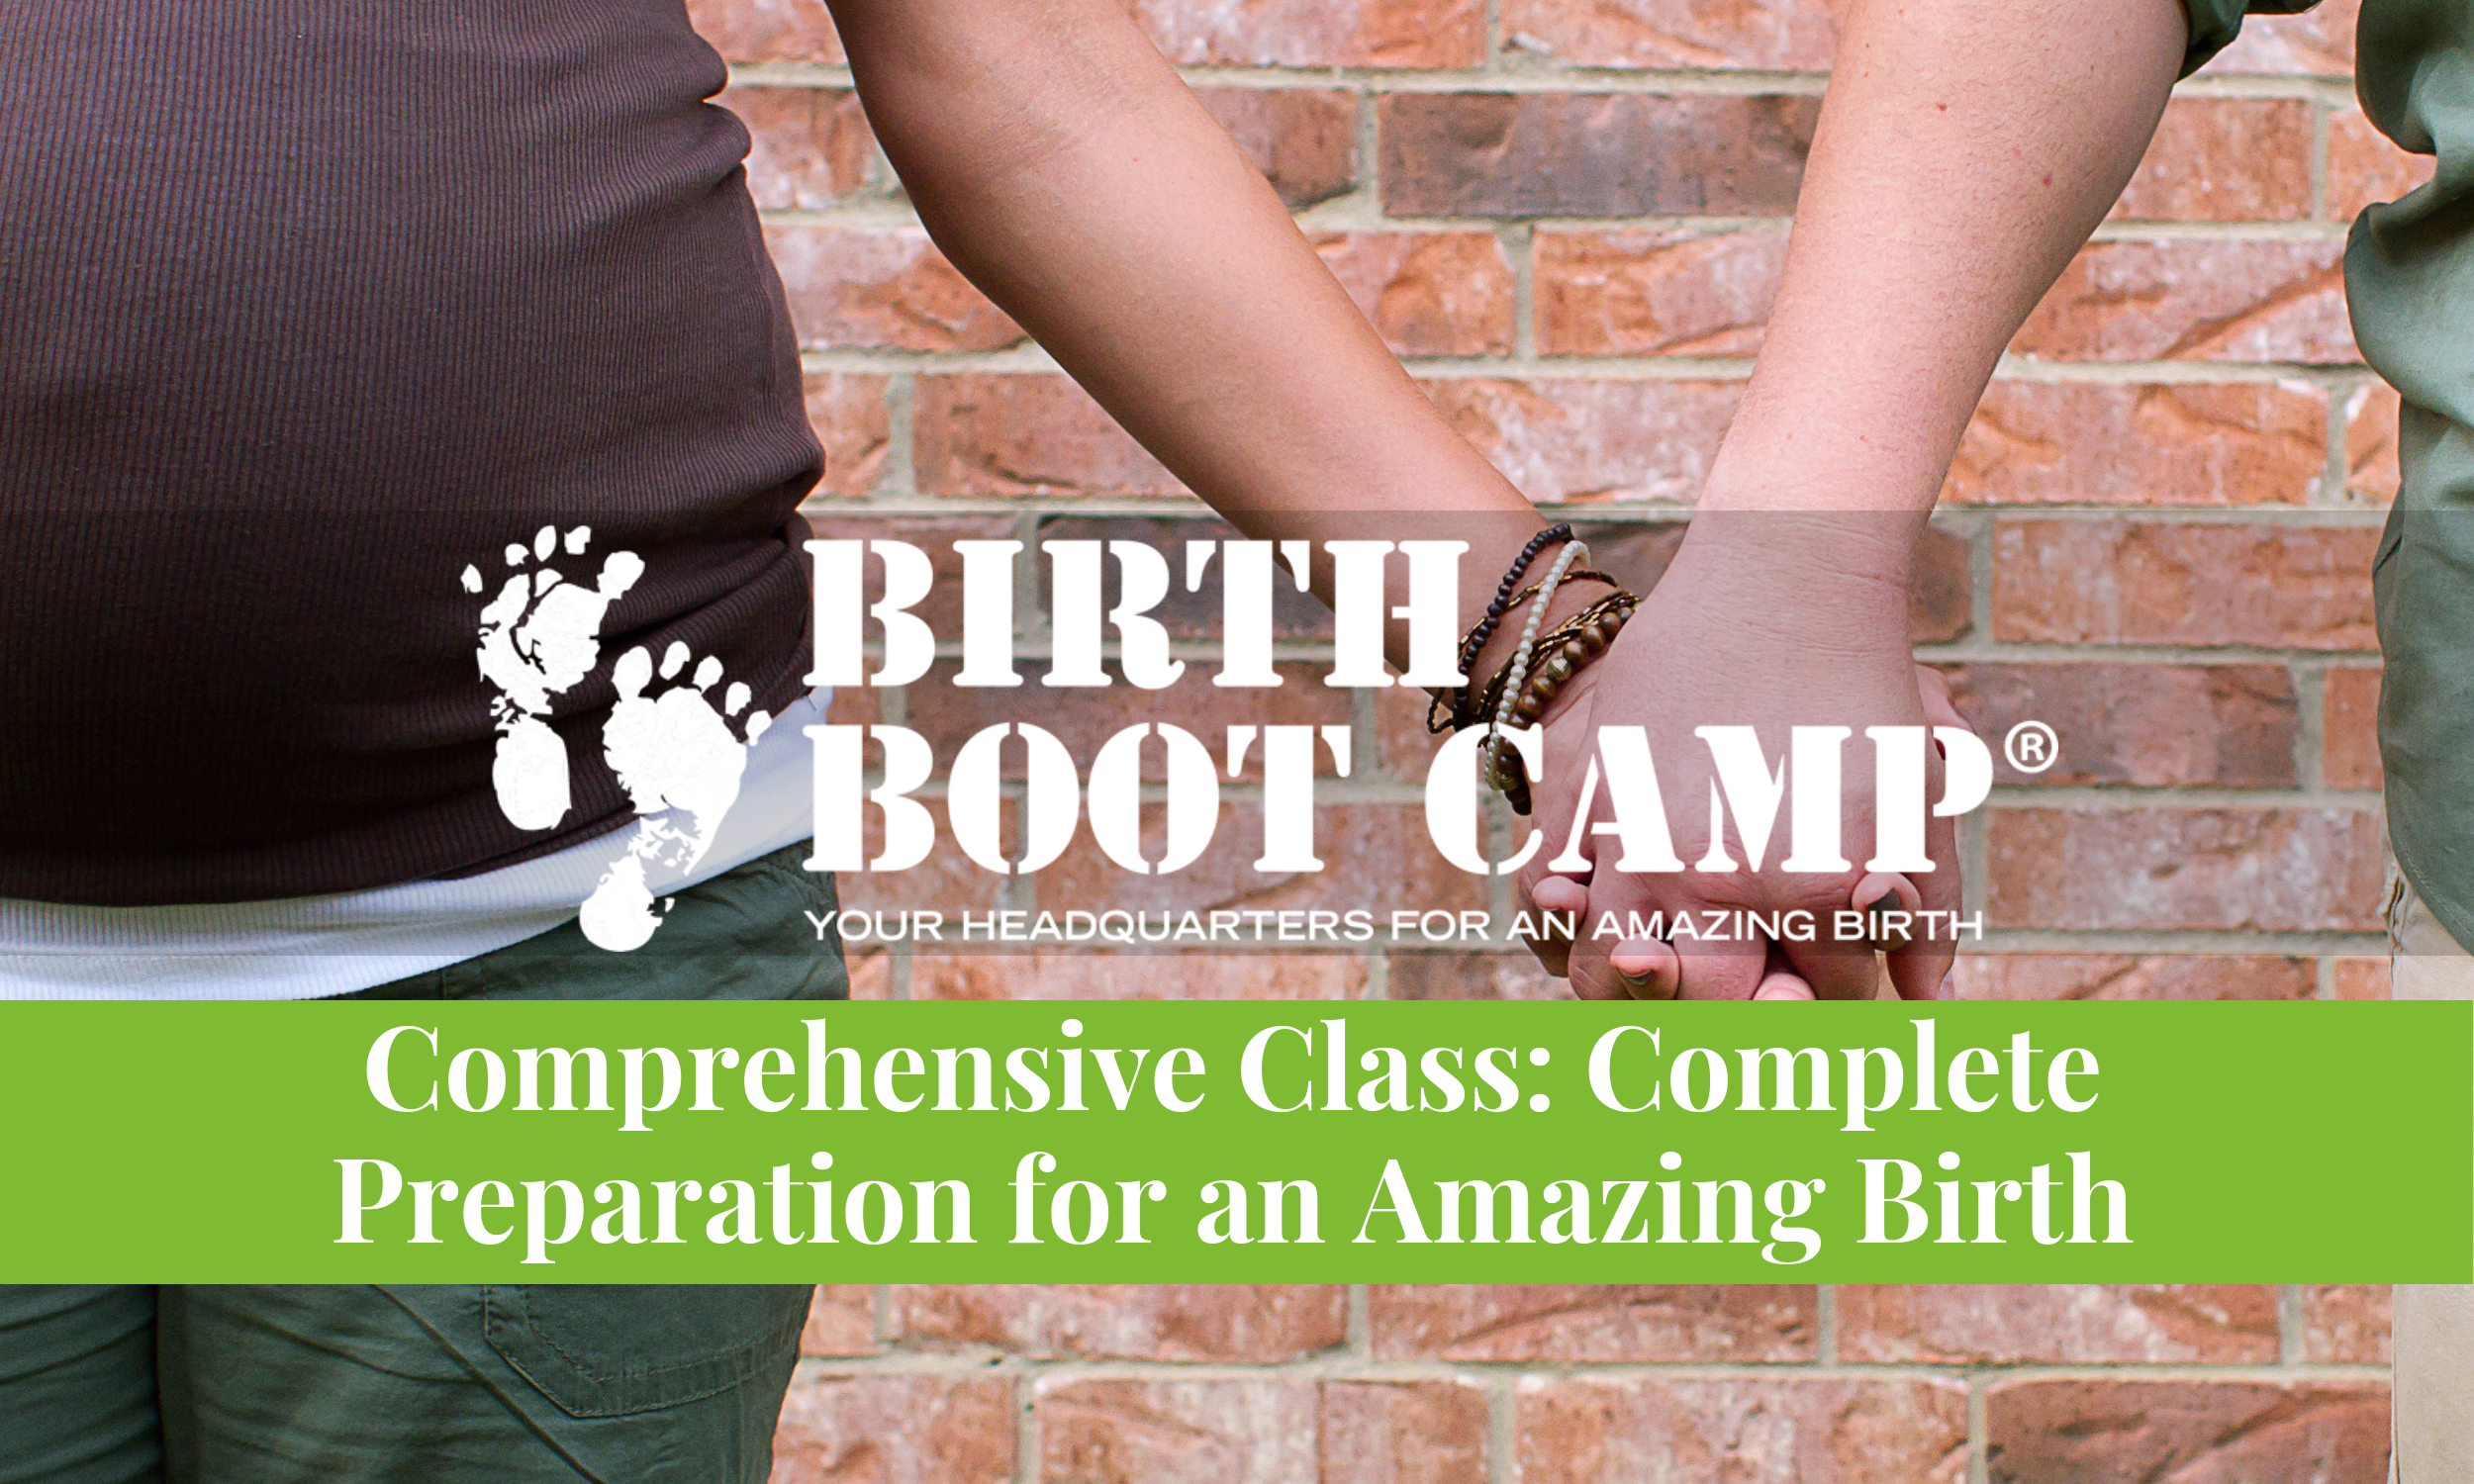 Birth Boot Camp Comprehensive: Complete Preparation for an Amazing Birth